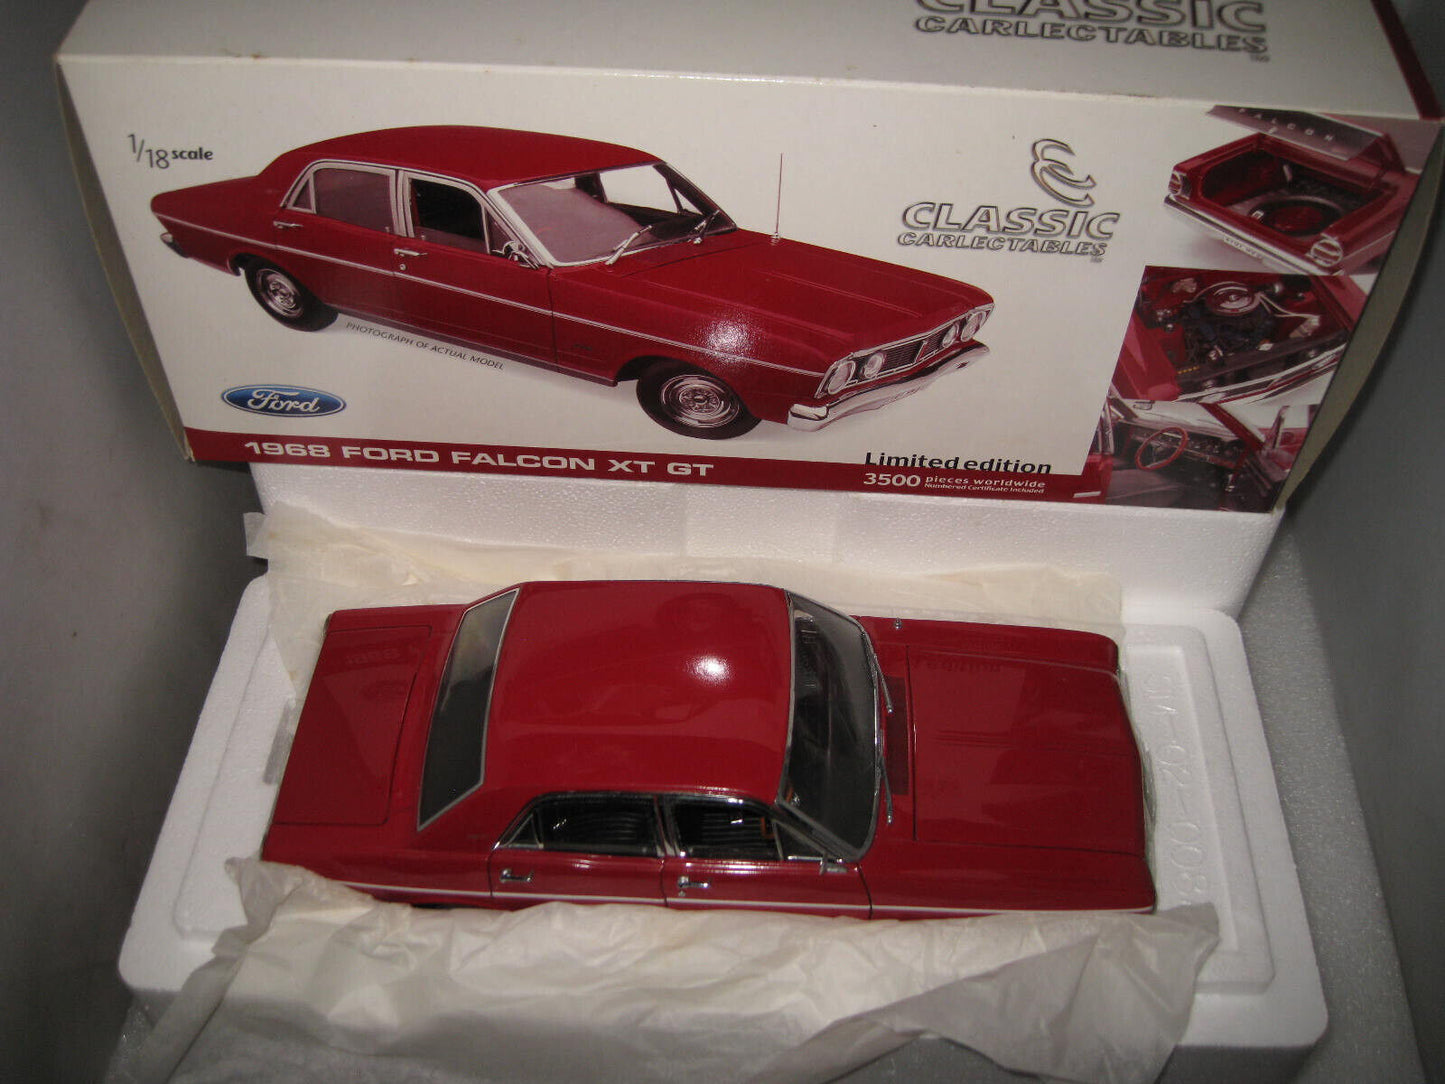 CLASSIC 1/18   1968 FORD XT GT FALCON  CANDY APPLE RED OLD STOCK  #18074